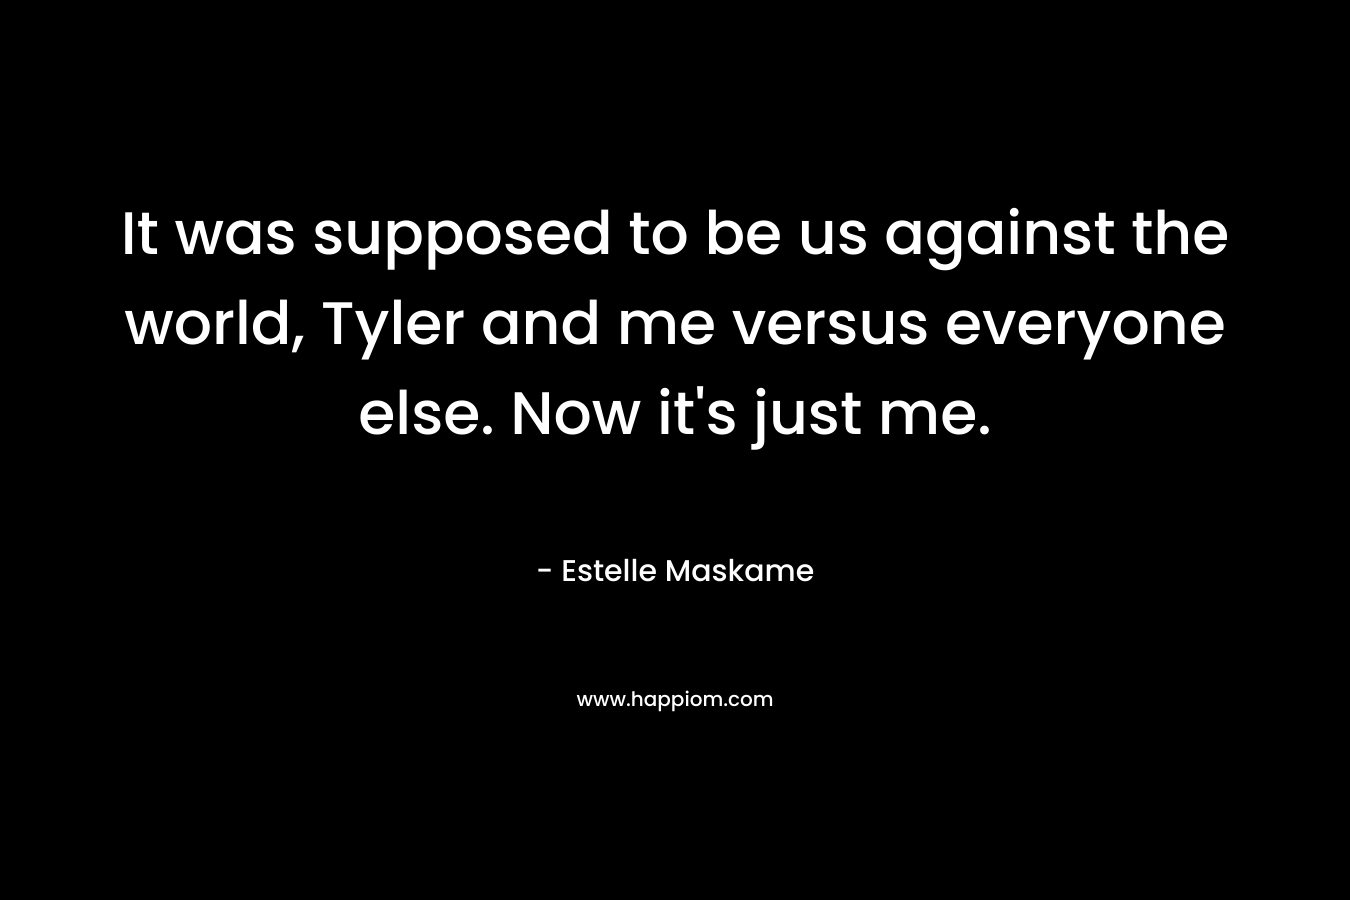 It was supposed to be us against the world, Tyler and me versus everyone else. Now it’s just me. – Estelle Maskame